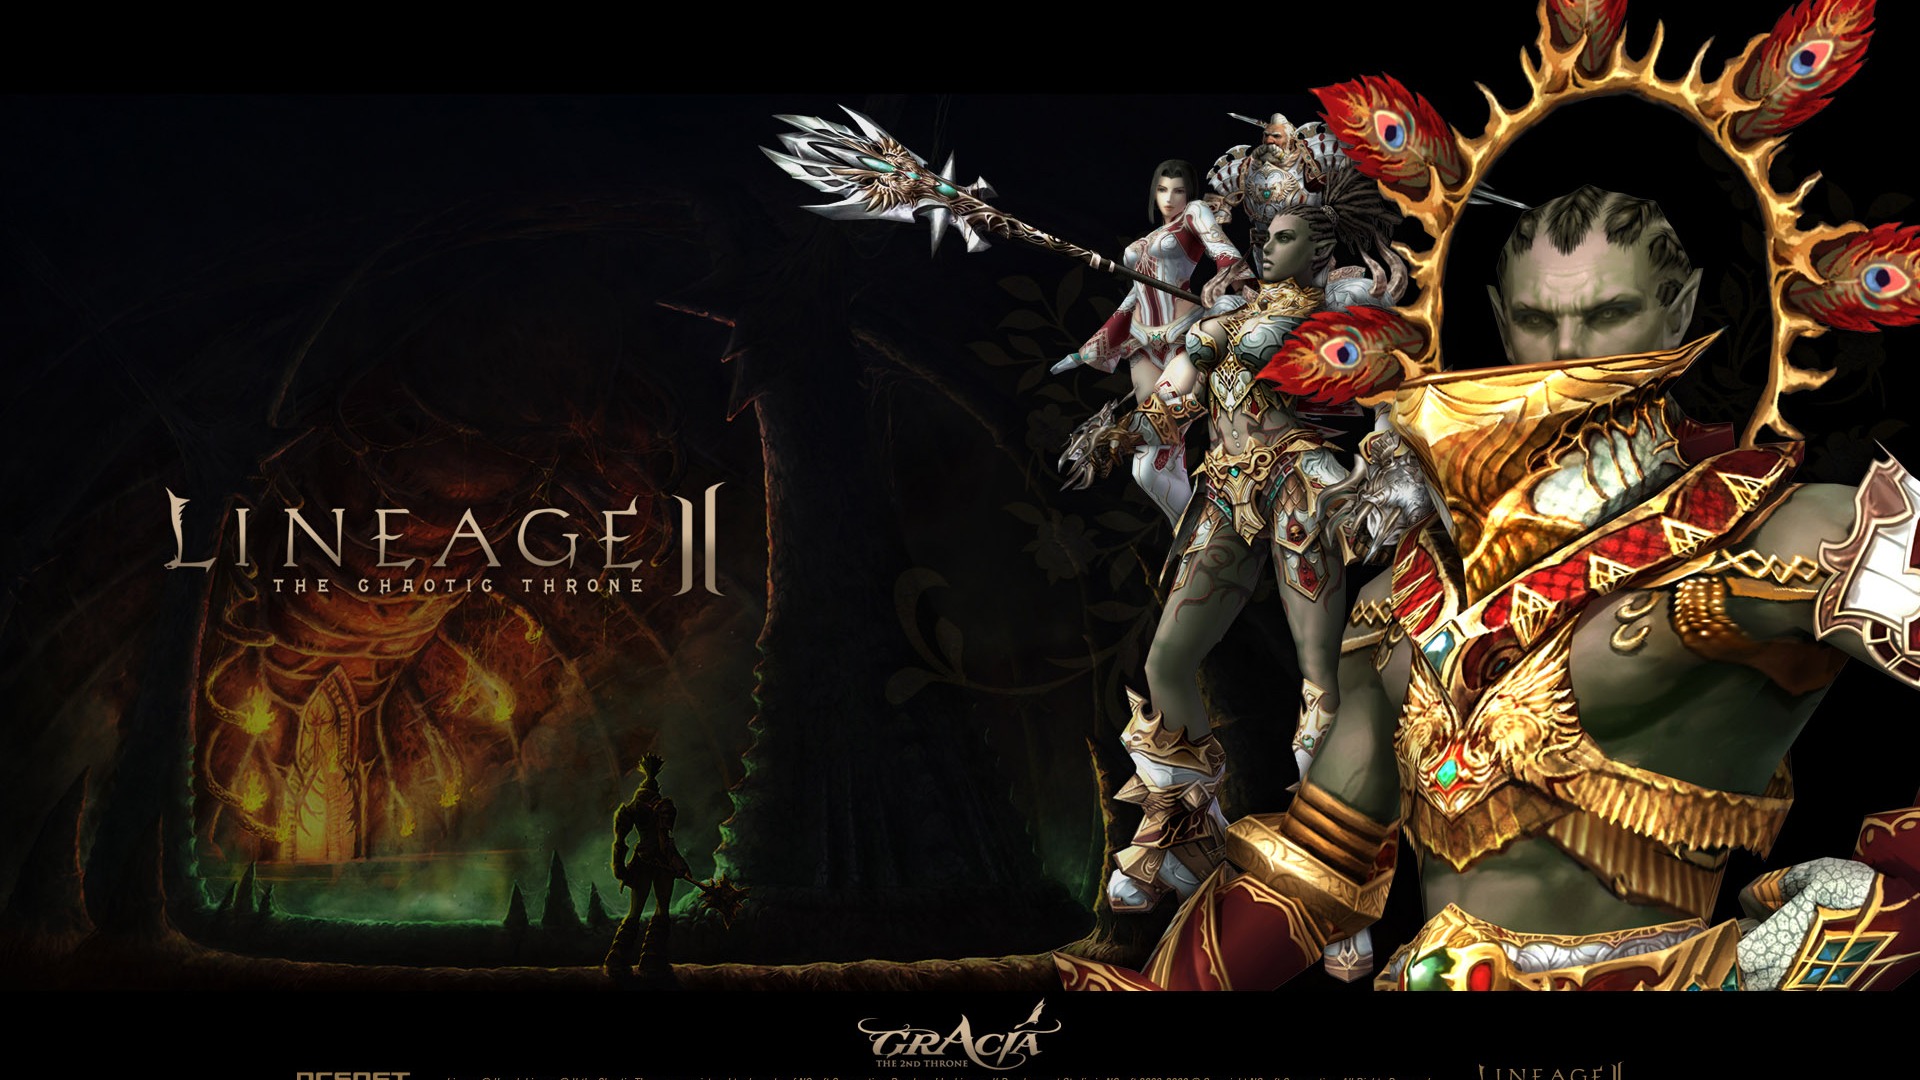 LINEAGE Ⅱ Modellierung HD-Gaming-Wallpaper #2 - 1920x1080